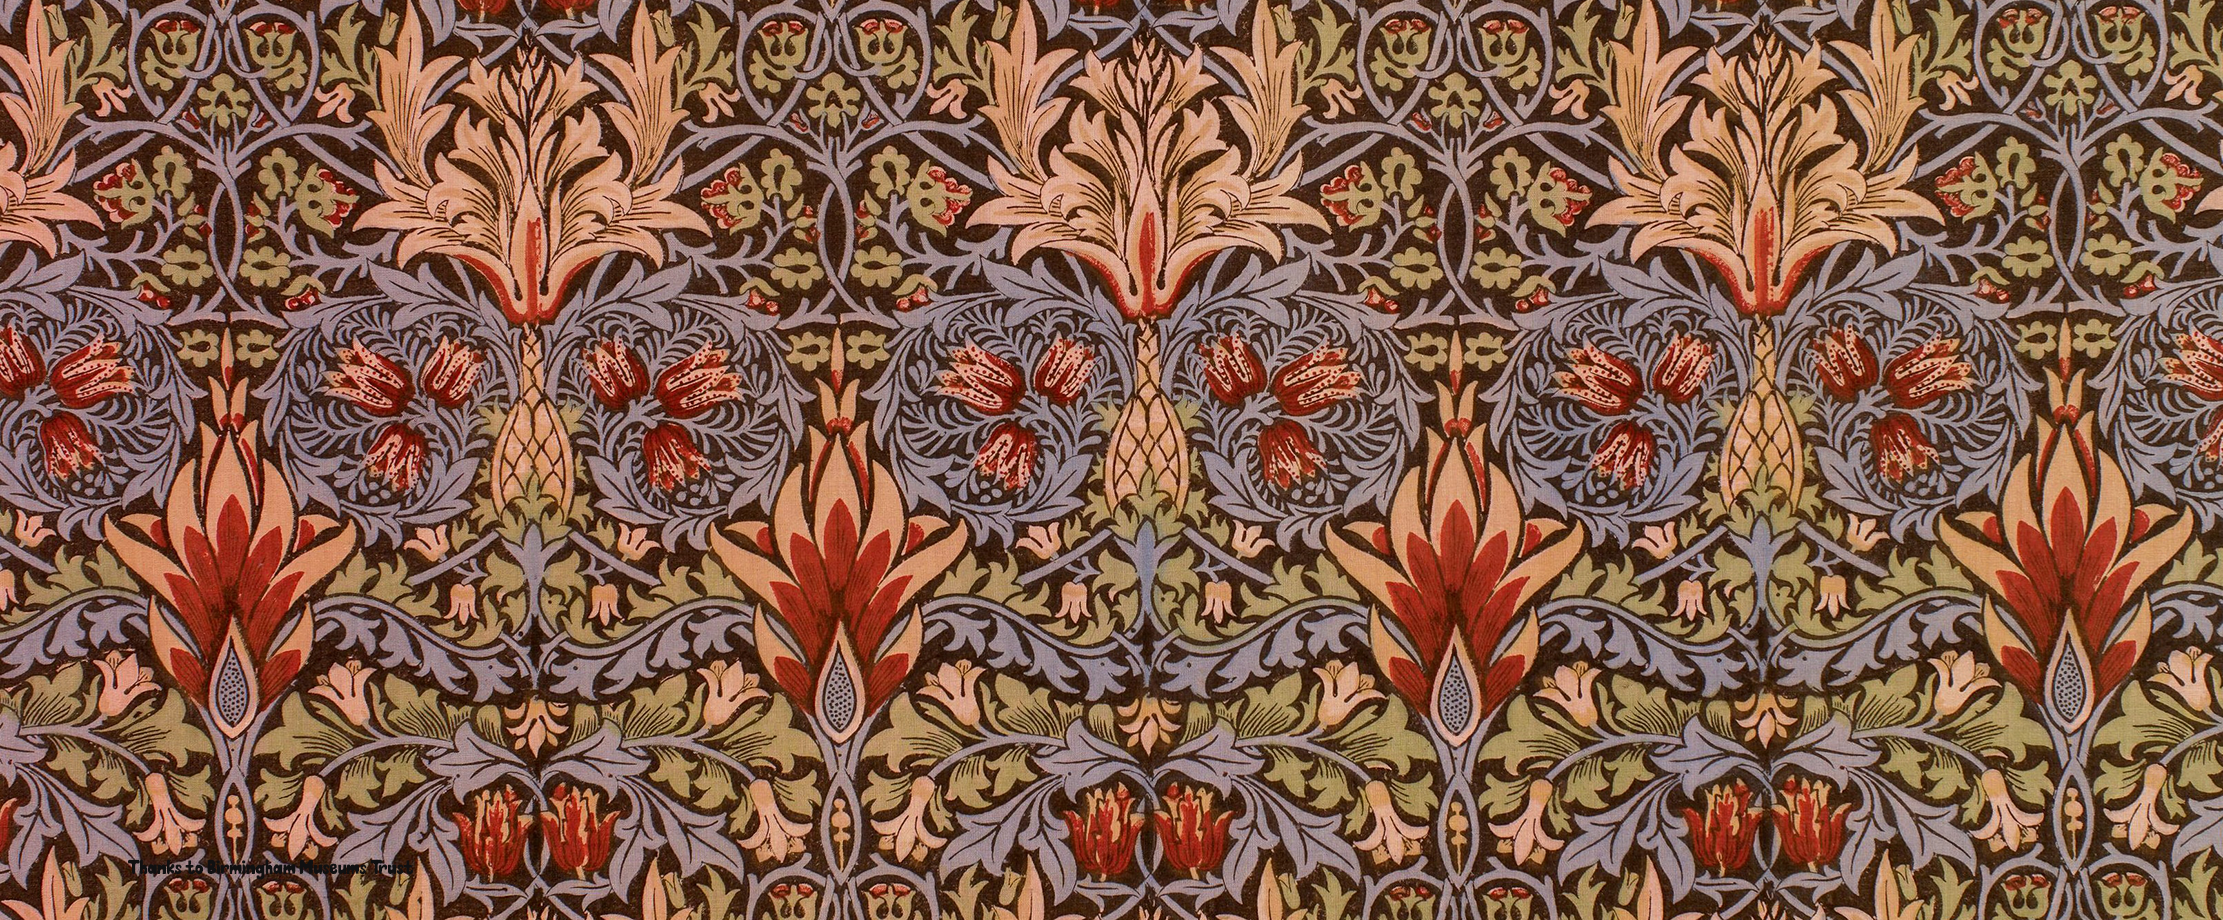 This is a beautiful patterned wallpaper designs with organic shapes in reds, greens and blues